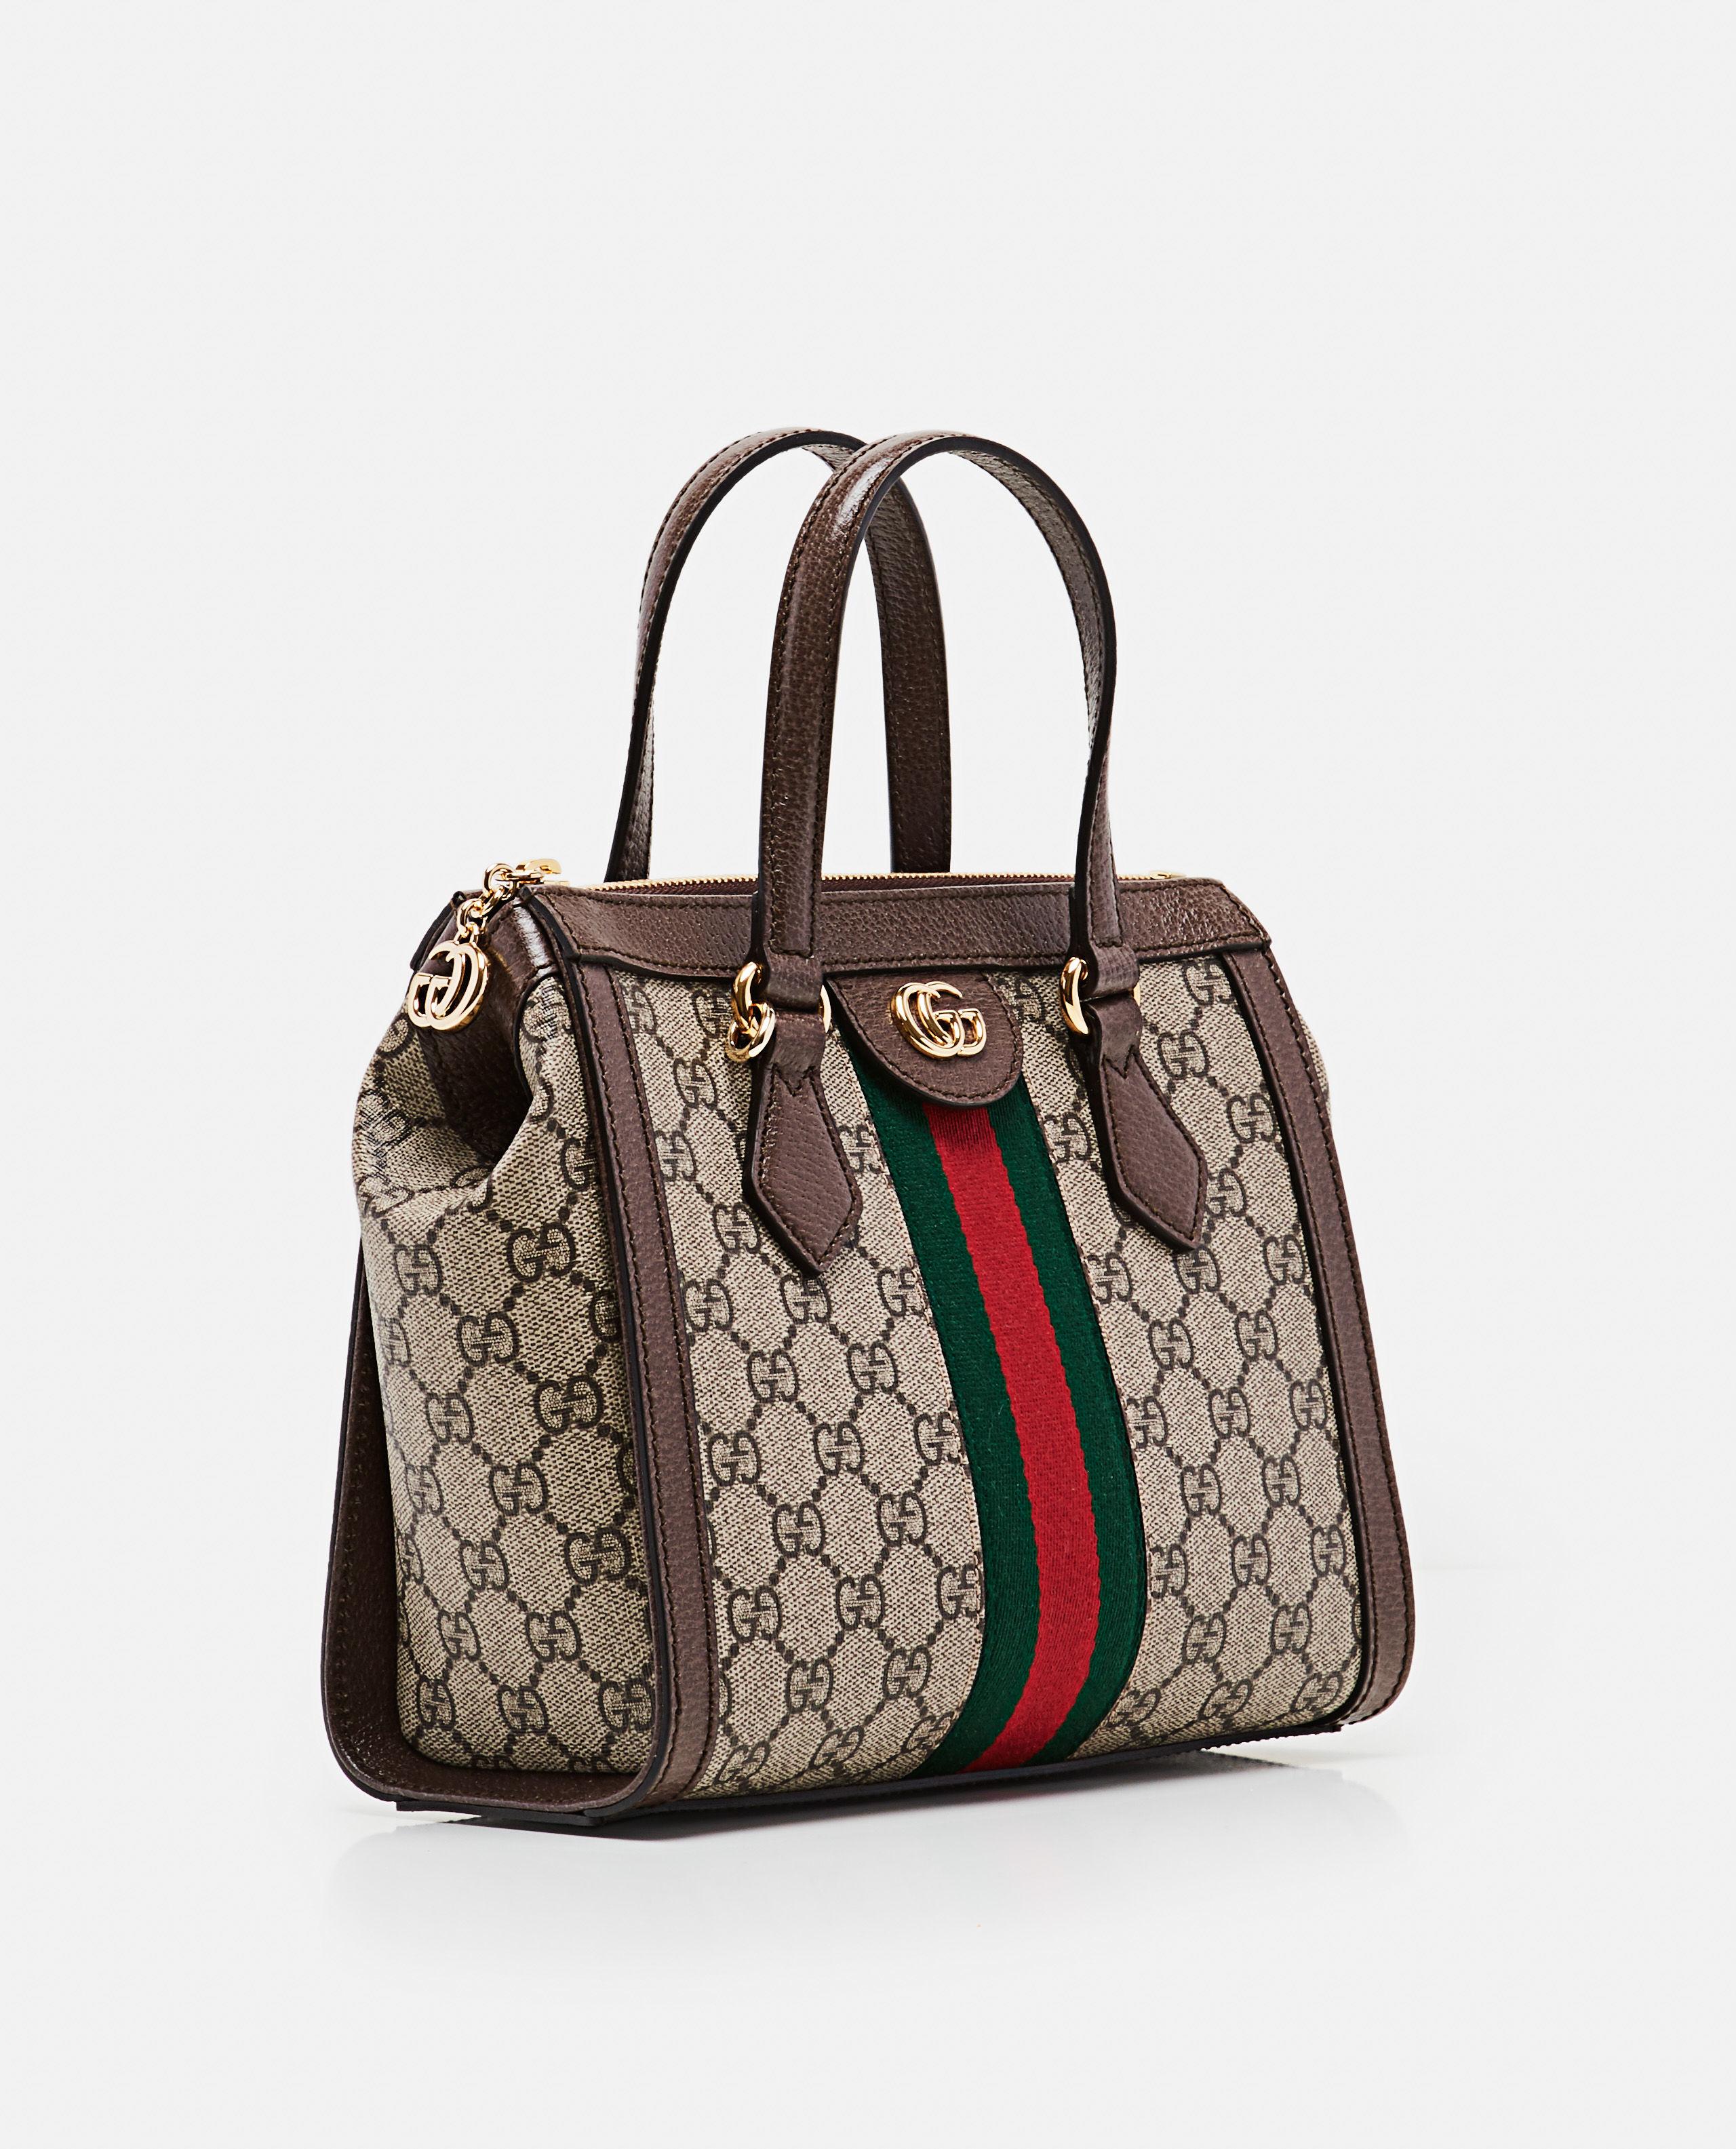 Gucci Synthetic Ophidia Small Gg Tote Bag in Brown - Lyst